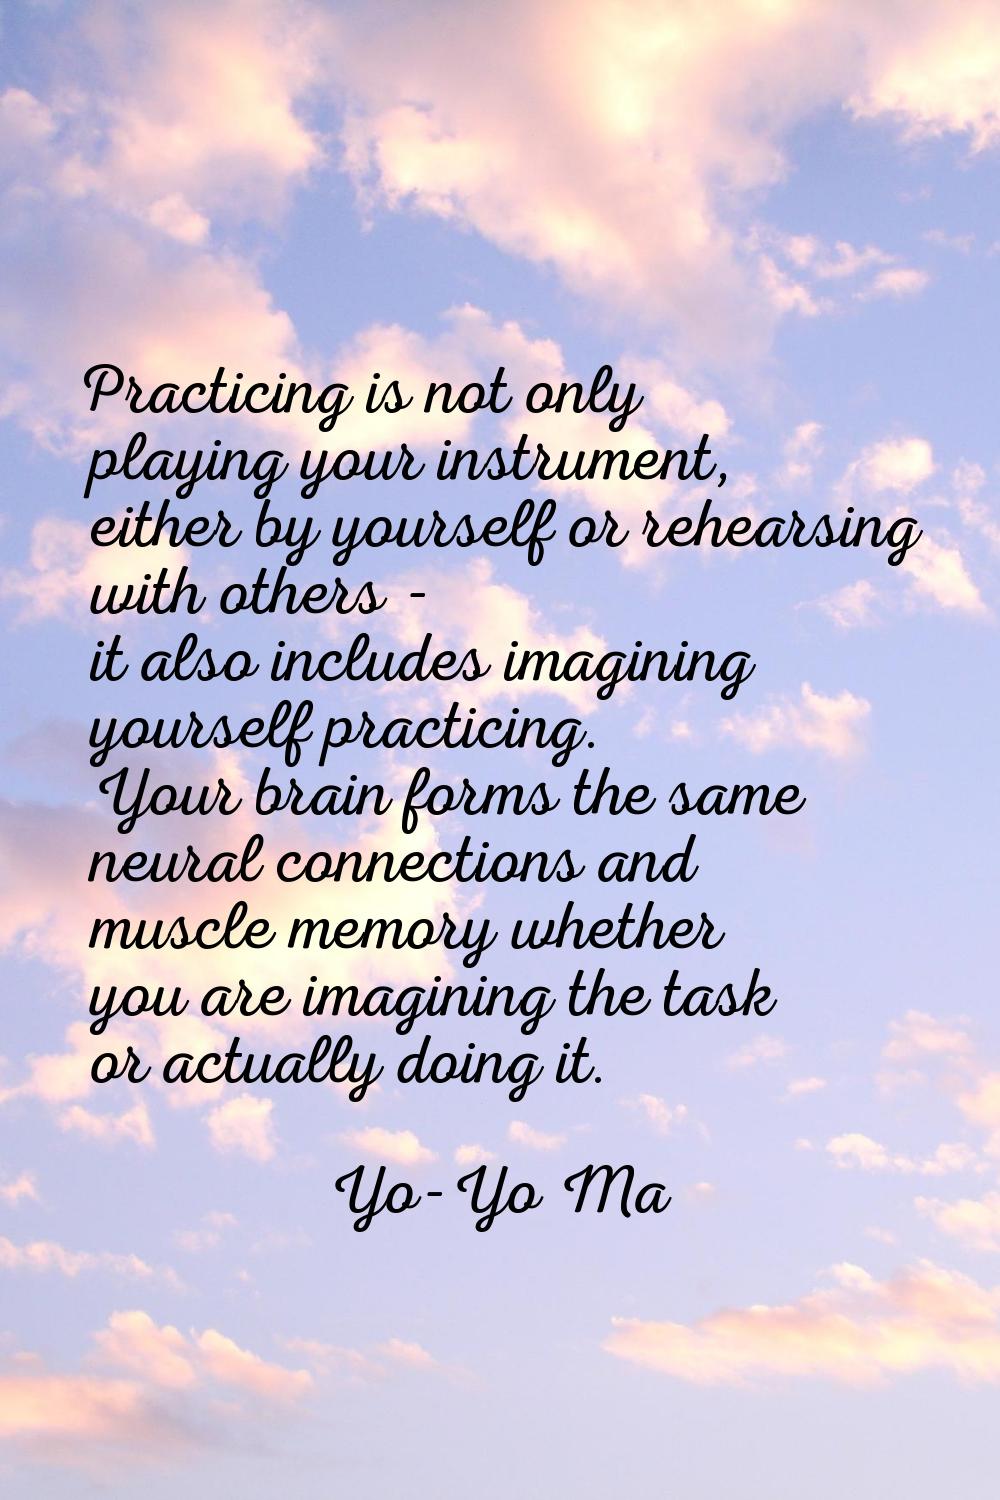 Practicing is not only playing your instrument, either by yourself or rehearsing with others - it a